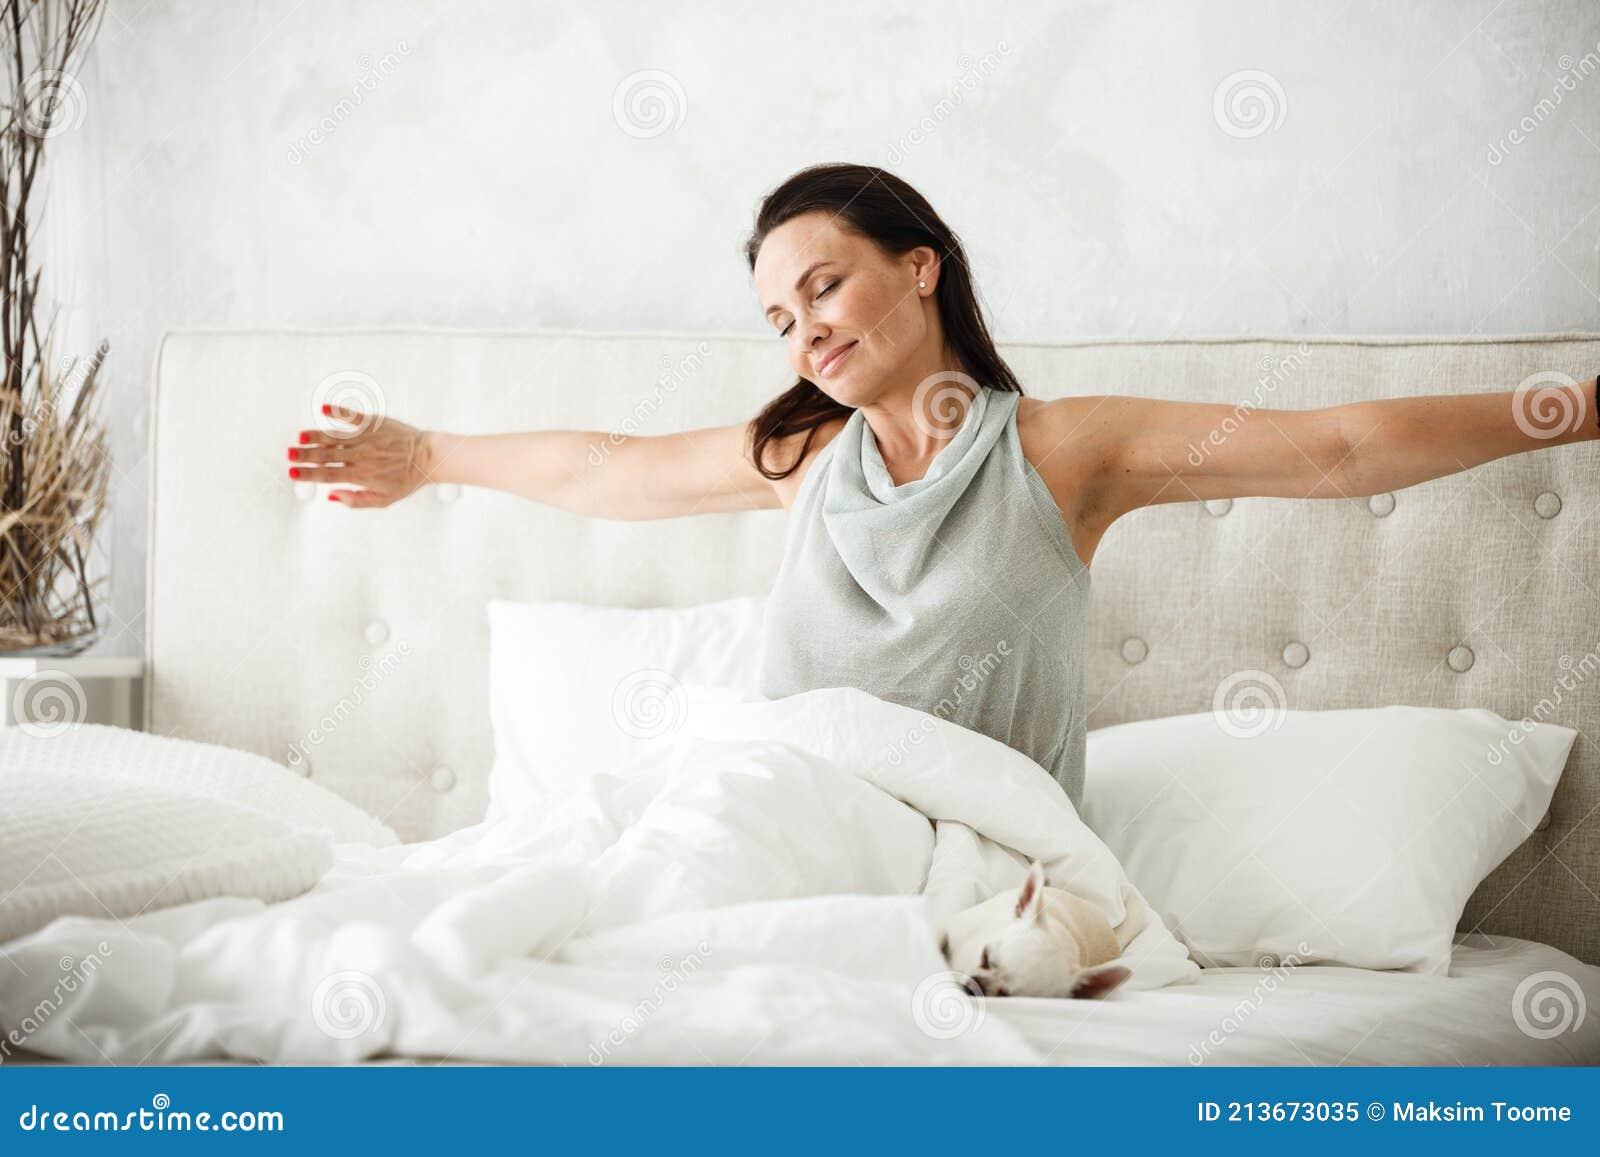 Lazy Morning Concept Beautiful Happy Woman Wakes Up In Bed And 